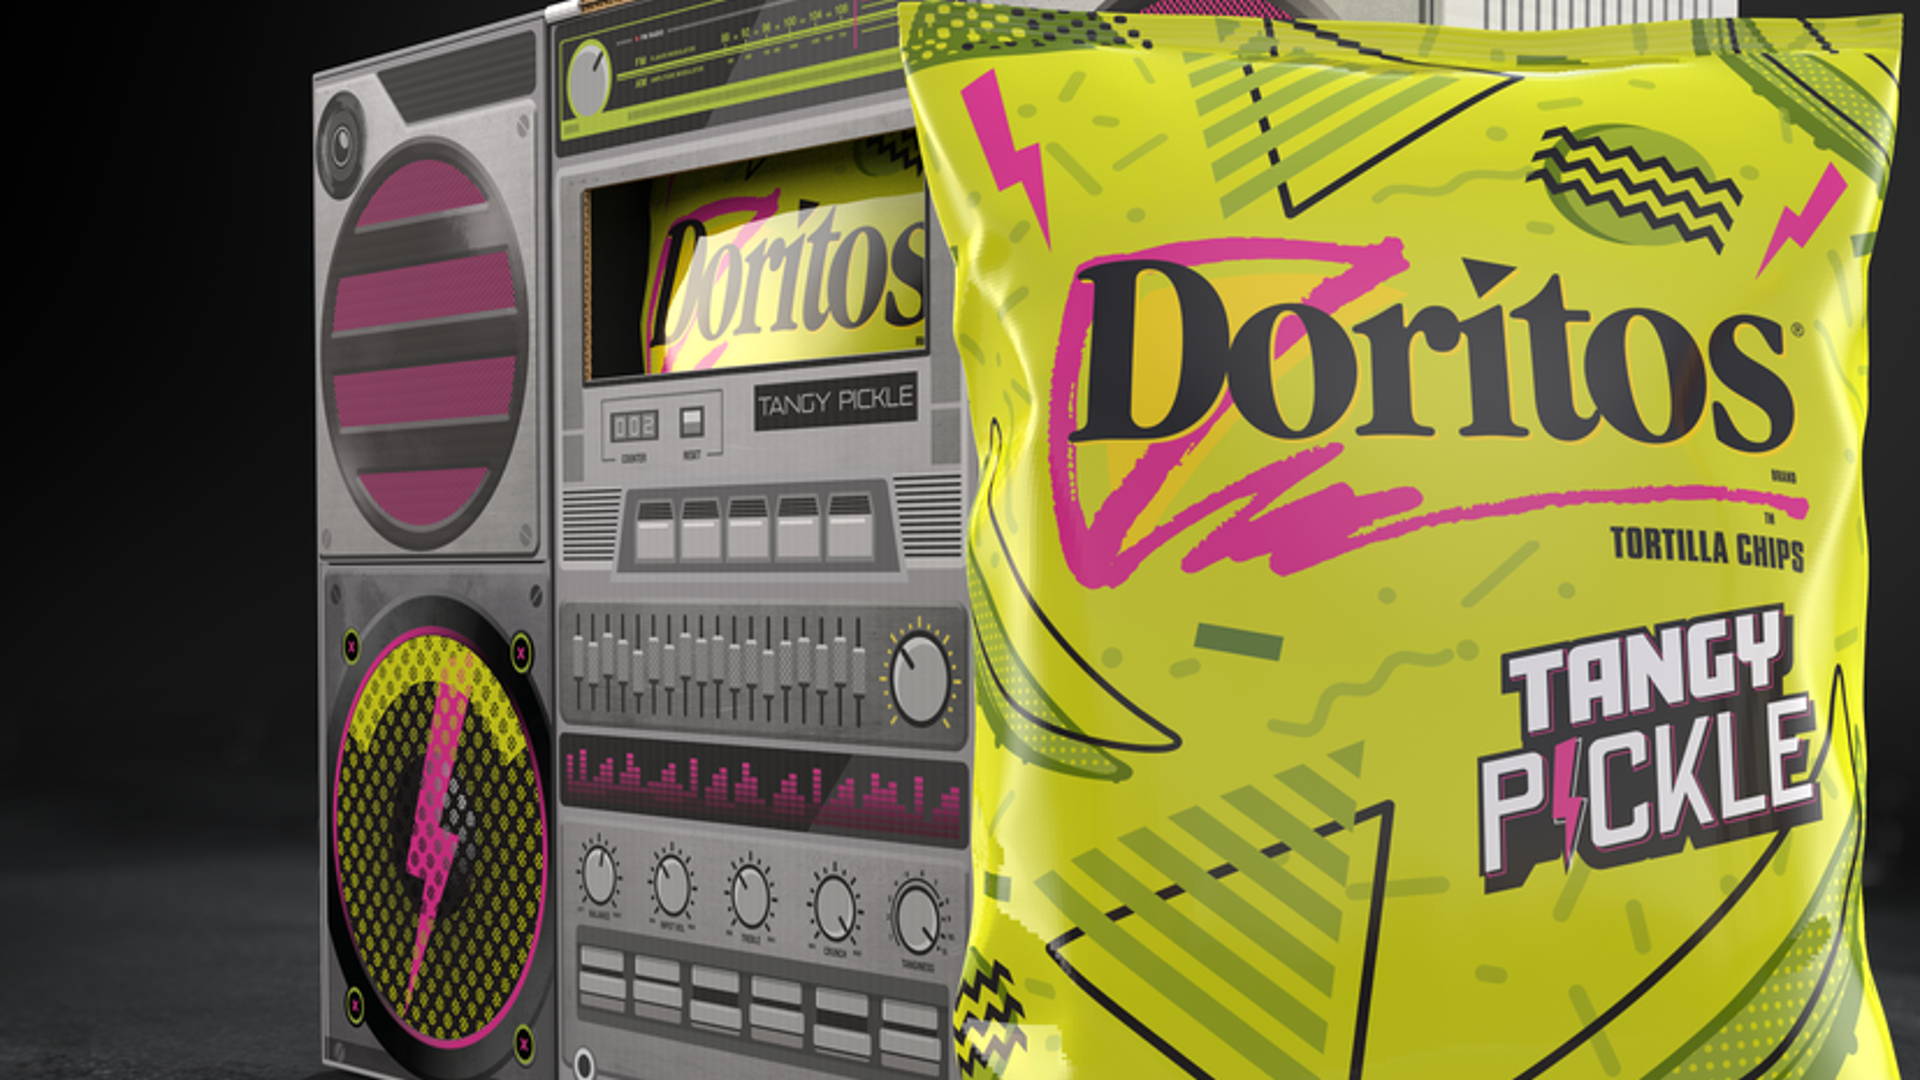 A bag of doritos tacos in front on some speakers - Doritos